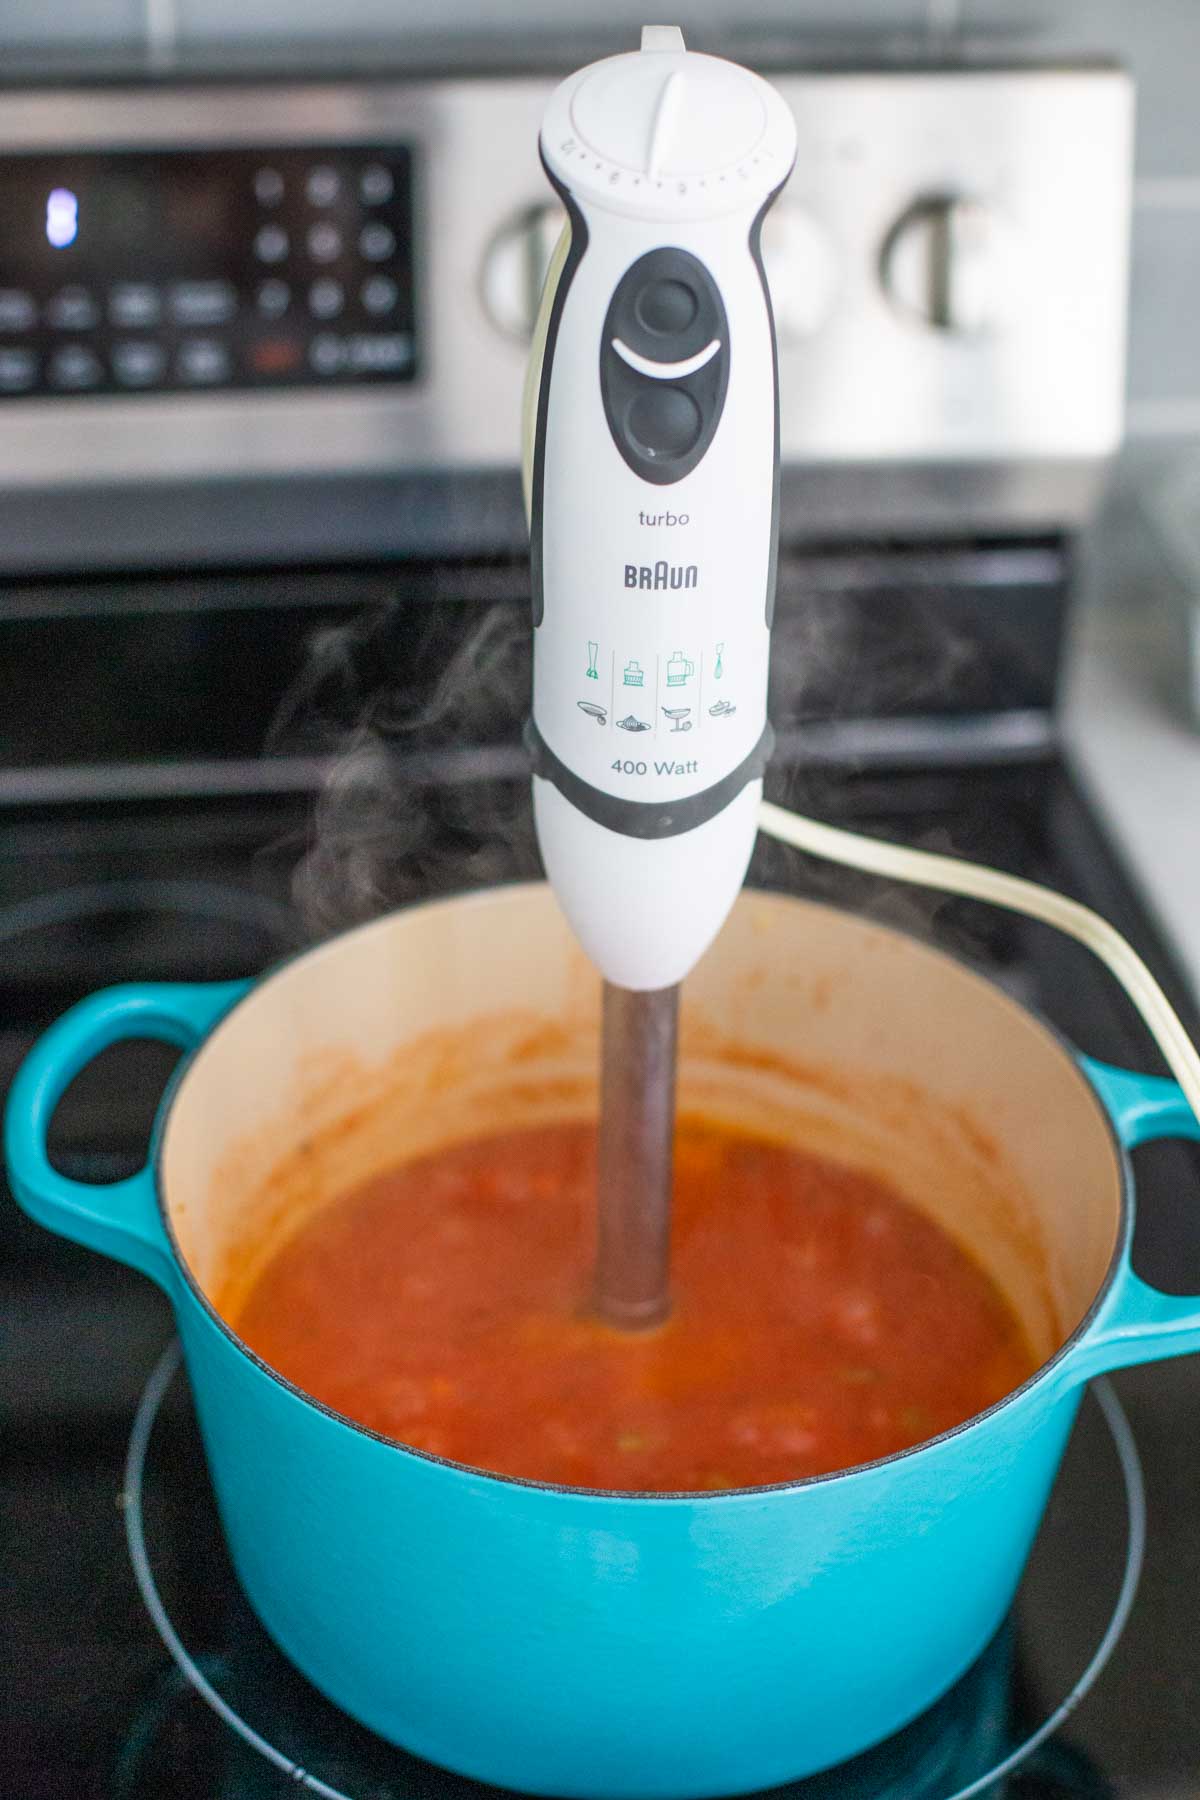 An immersion blender is set inside a blue Le Crueset enameled cast iron soup pot filled with tomato bisque soup.